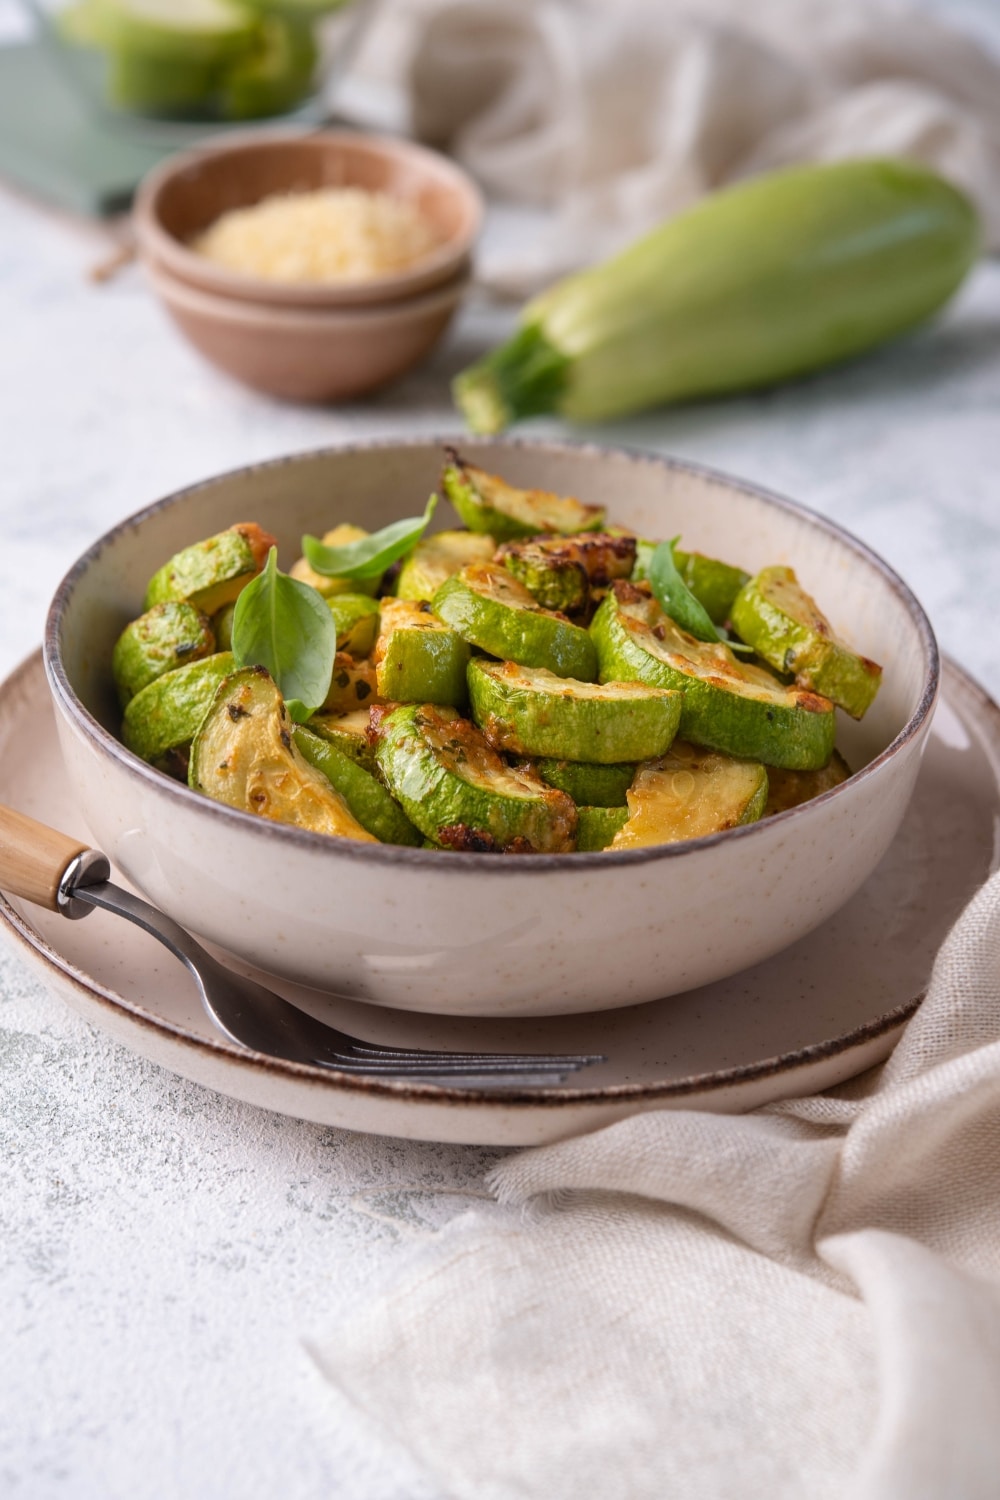 Air fried zucchini garnished with herbs in a bowl. The bowl is on plate with a wooden handle fork. Surrounding the plate is a fresh zucchini, a small bowl of grated parmesan, a glass bowl of zucchini slices, and a tea towel.